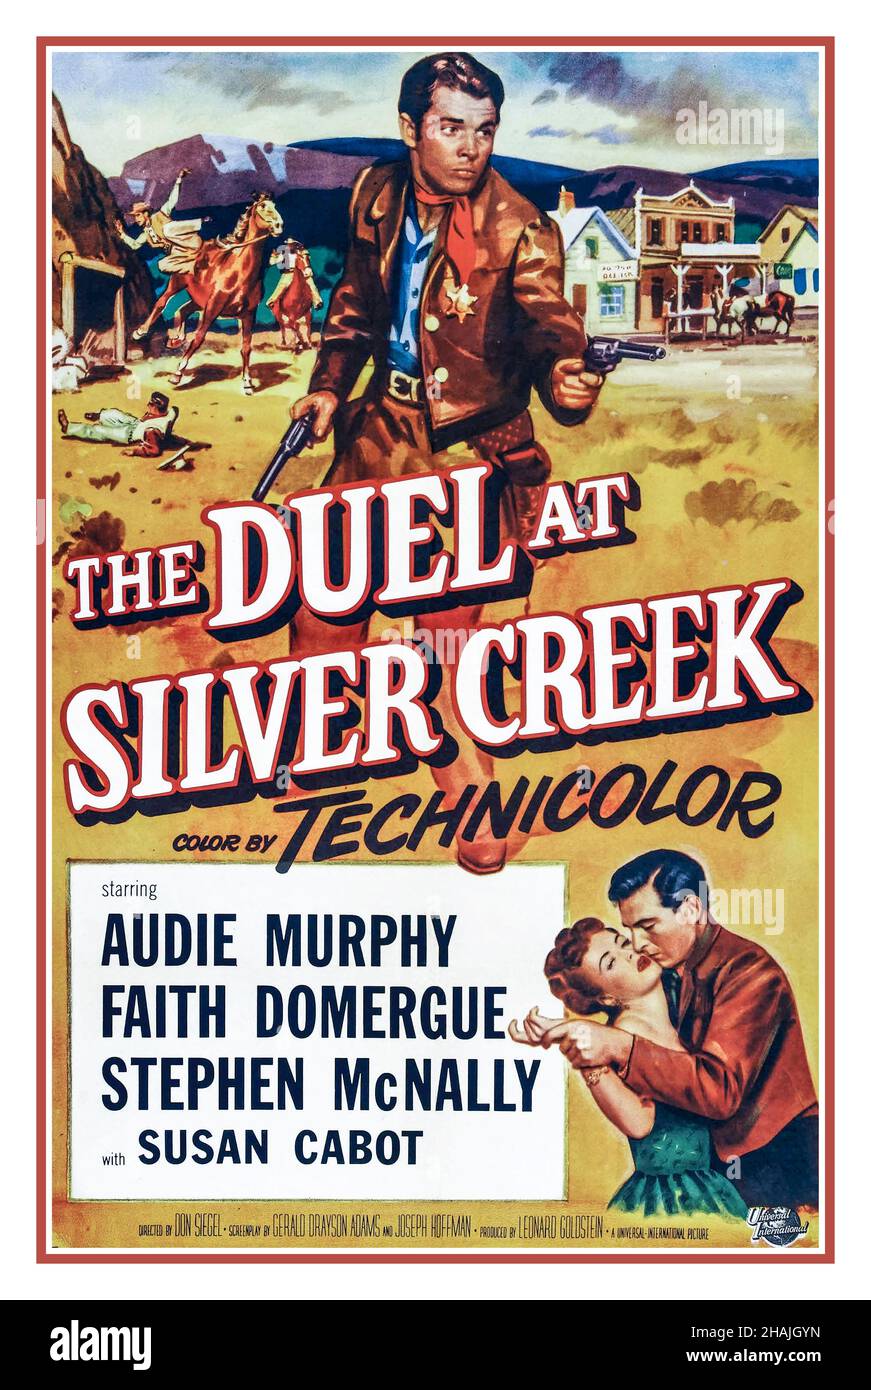 Vintage 1950's movie film poster 'THE DUEL AT SILVER CREEK', Audie Murphy, Faith Domergue, Stephen McNally, & Susan Cabot, Directed by Don Siegel Produced by Leonard Goldstein Universal Pictures 1952 Stock Photo